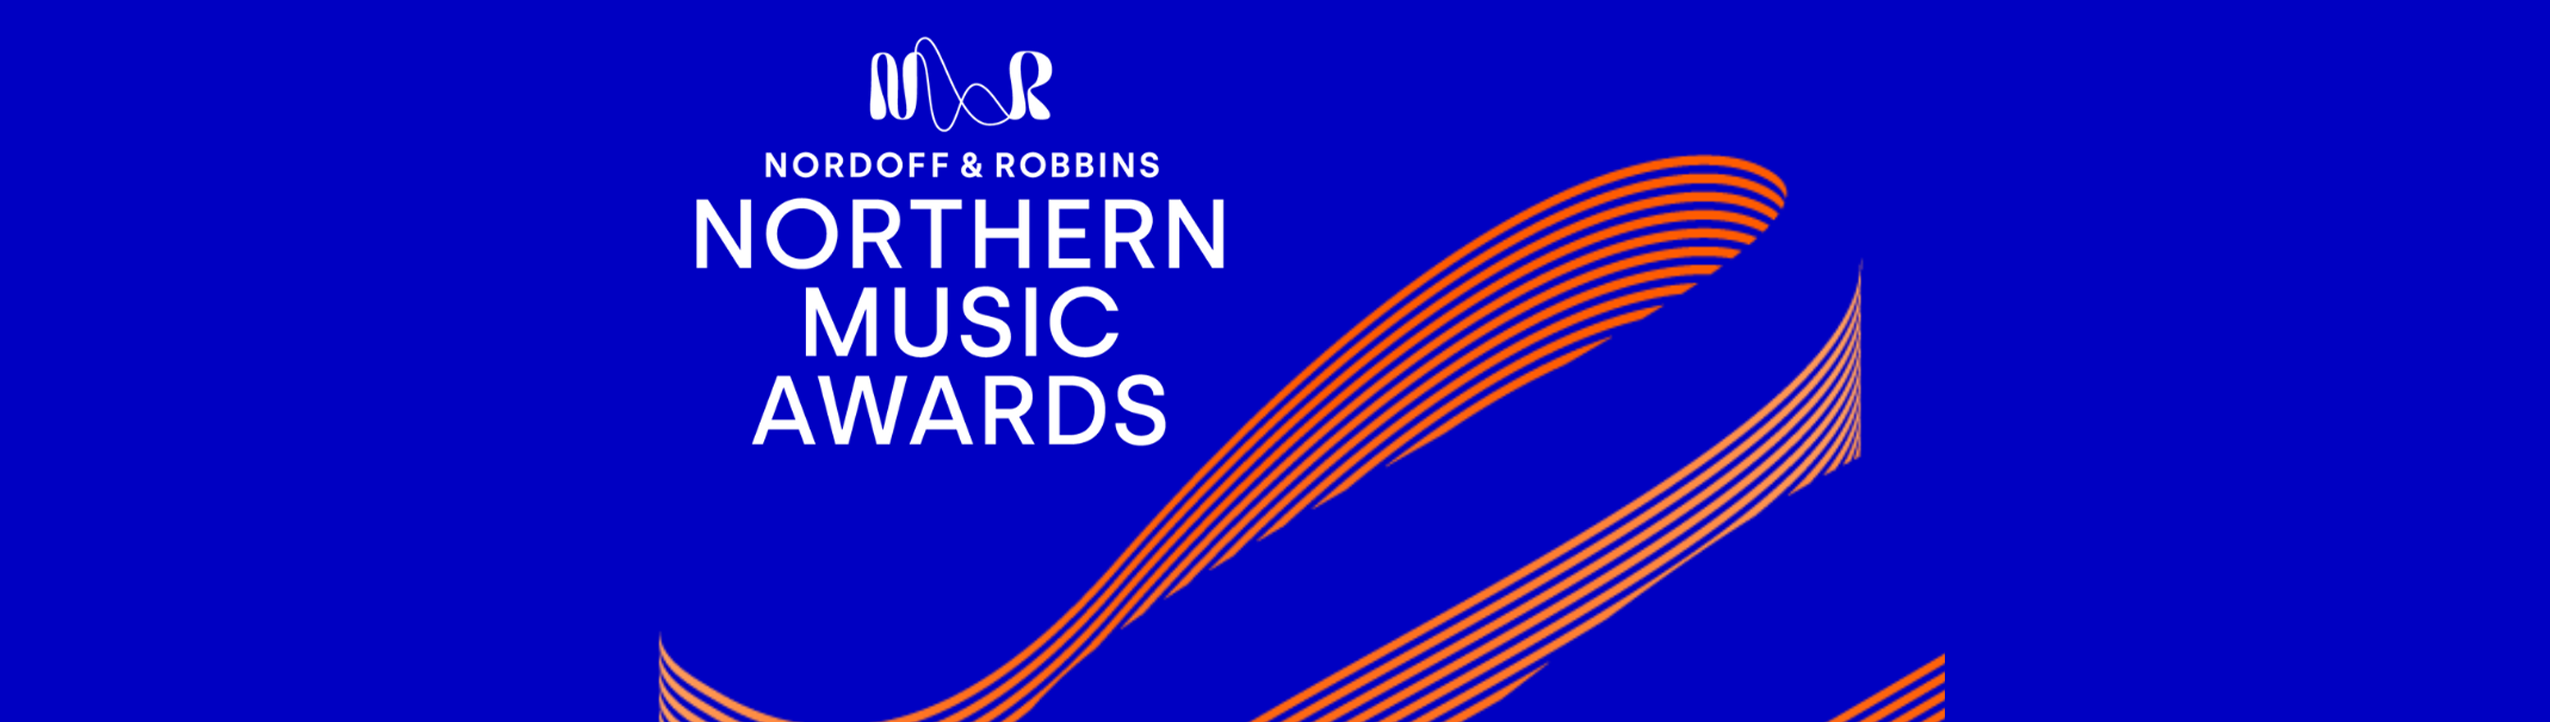 Inaugural Nordoff and Robbins Northern Music Awards supported by Ticketmaster launches to celebrate breadth of musical talent across the region